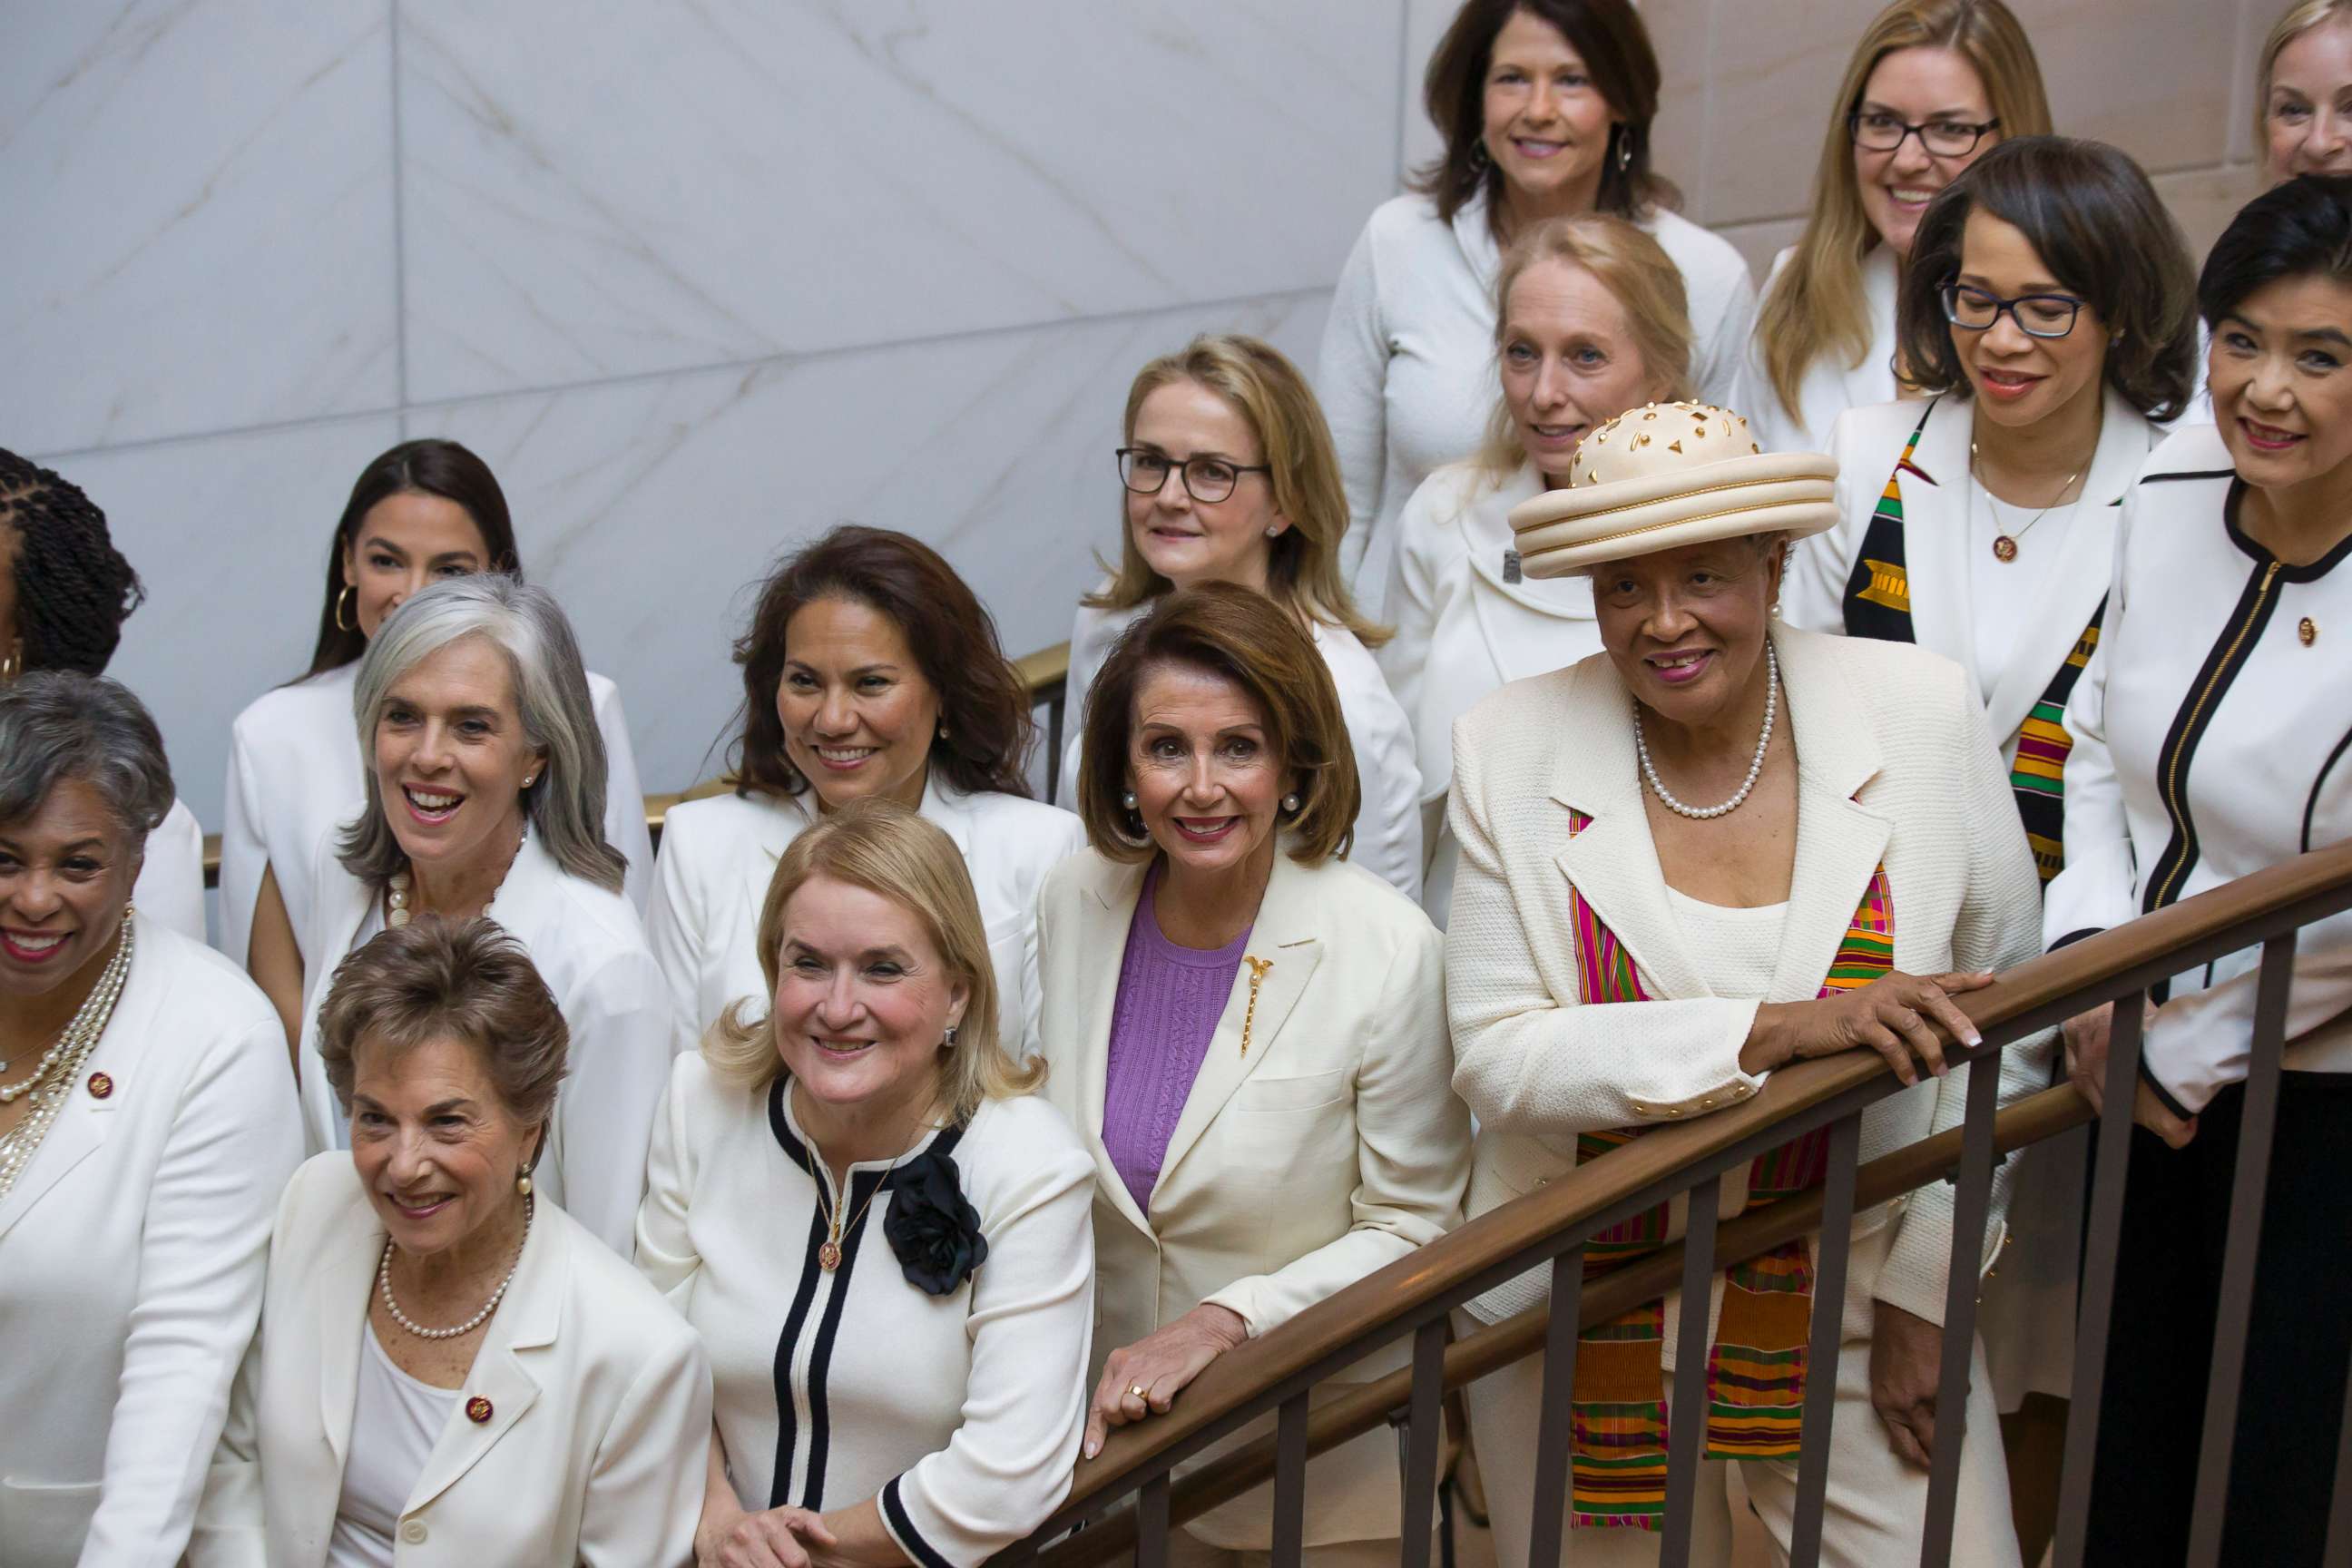 PHOTO: House Speaker Nancy Pelosi is joined by other women wearing white, as they pose for a group photo before the State of the Union address by President Donald Trump, on Capitol Hill, Feb. 5, 2019, in Washington.